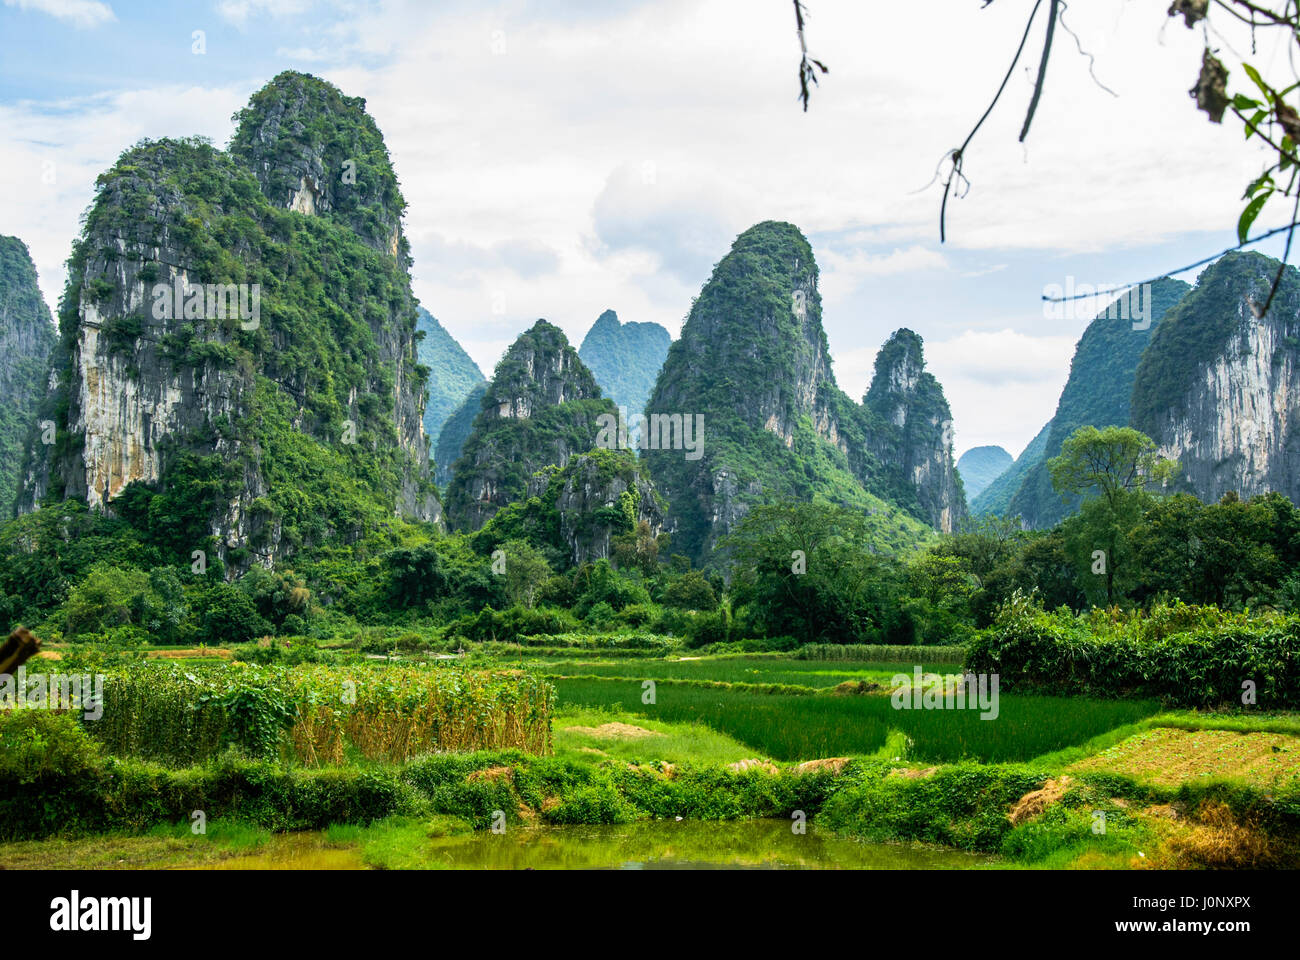 Karst mountains and countryside scenery Stock Photo